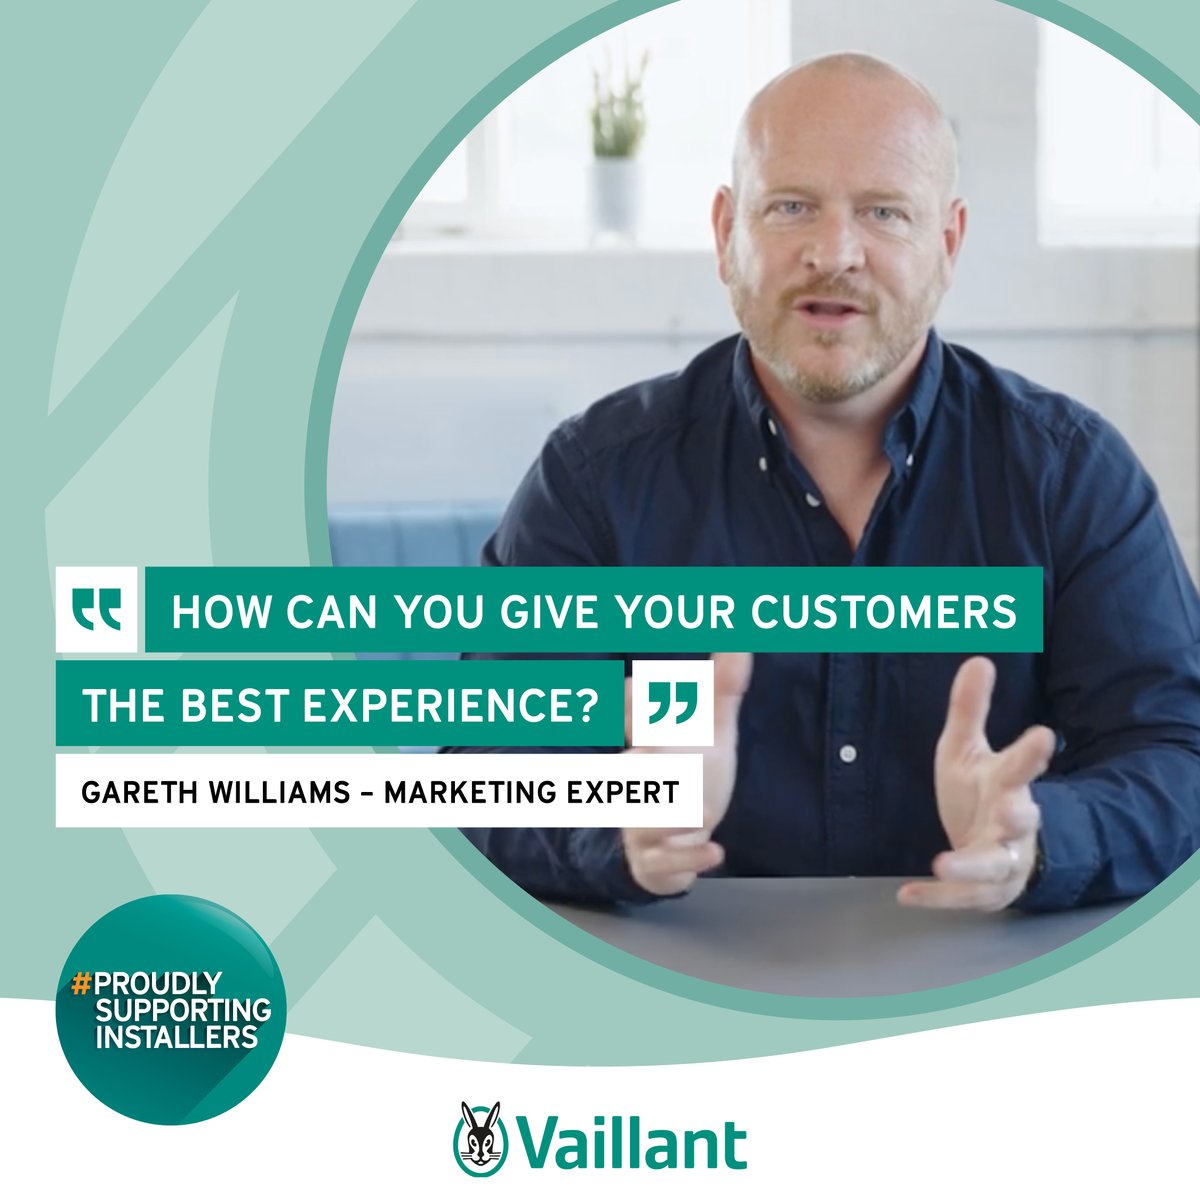 In our brand new video series, smartTALKS, marketing expert Gareth Williams will guide you through the process of providing a good customer experience. Login to your Advance account at vaillant-advance.co.uk to learn more!